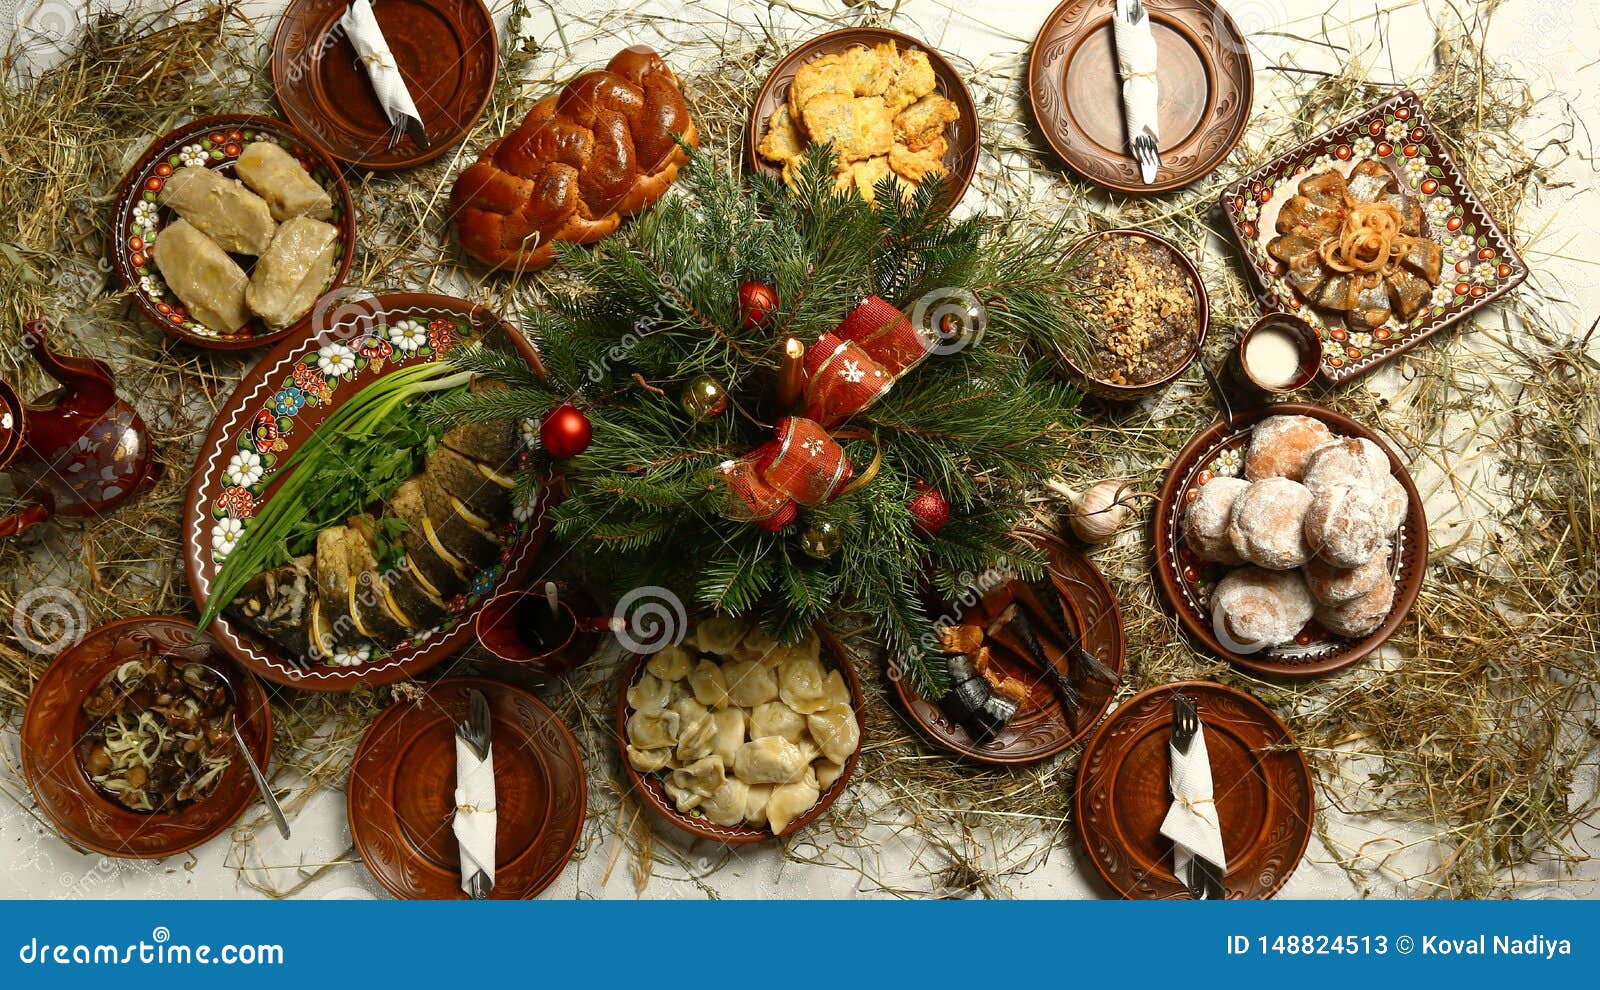 Christmas Family Dinner Table Concept Traditional Christmas Sweet Meal In Ukraine Belarus And Poland On Wooden Table Stock Image Image Of Background Meal 148824513